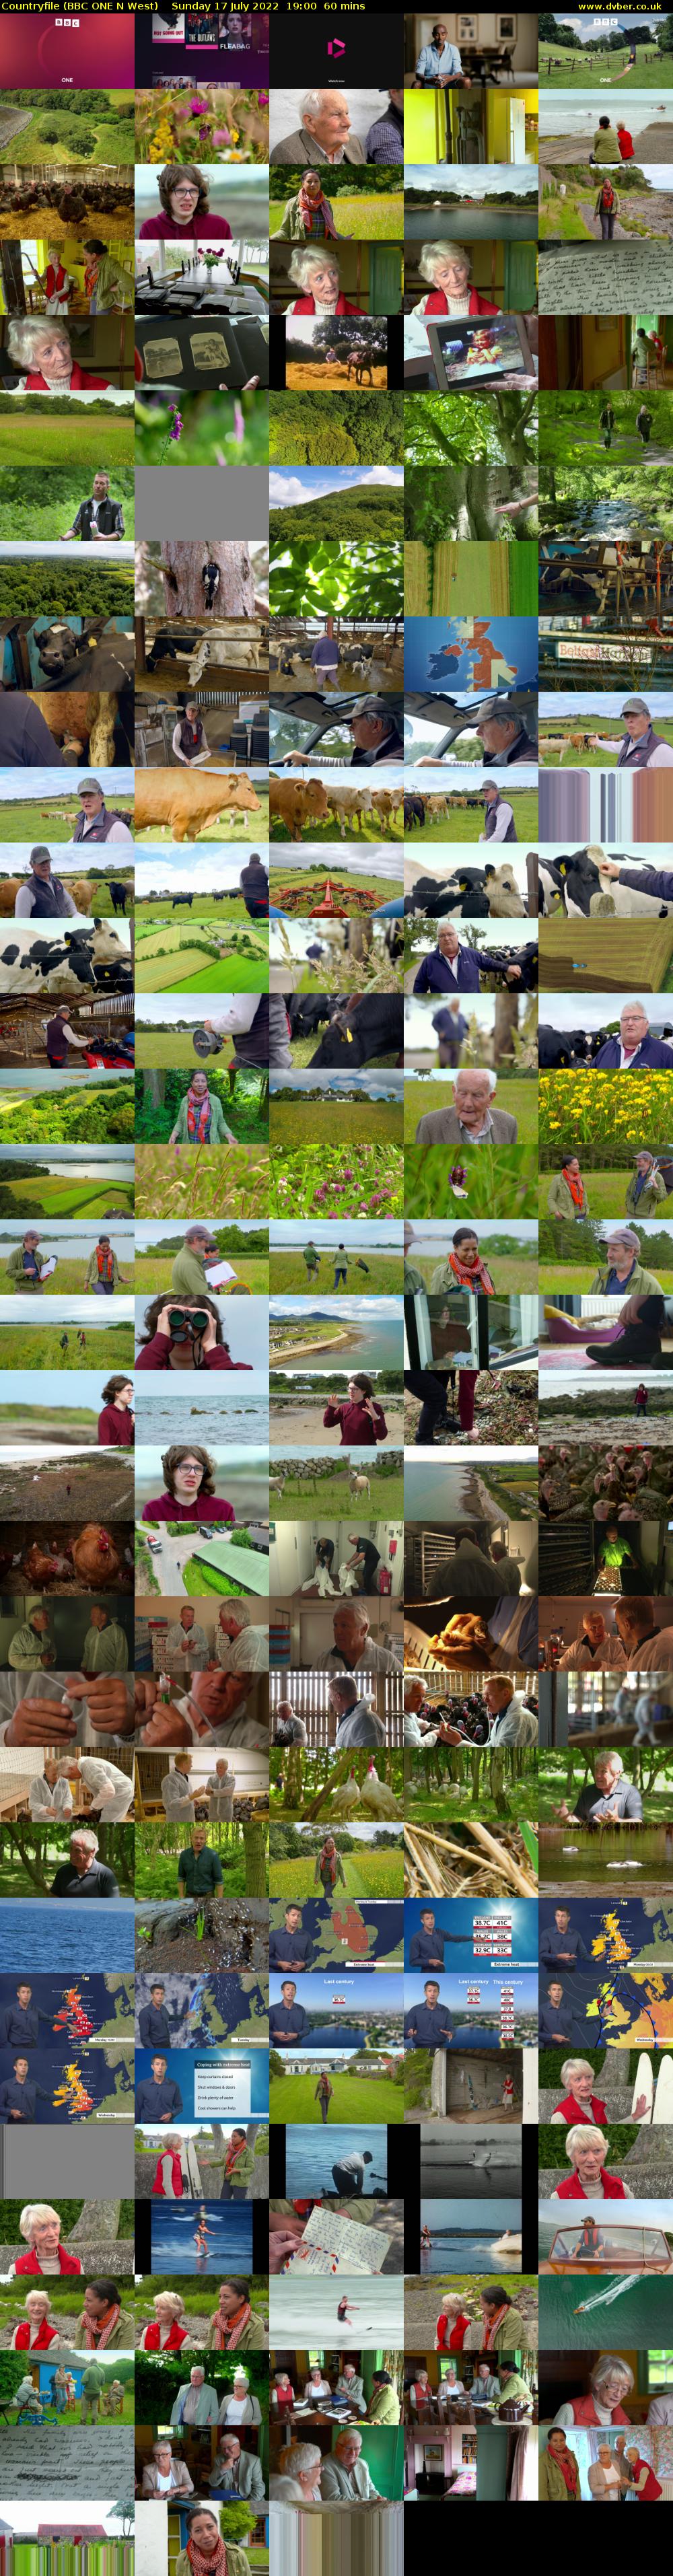 Countryfile (BBC ONE N West) Sunday 17 July 2022 19:00 - 20:00